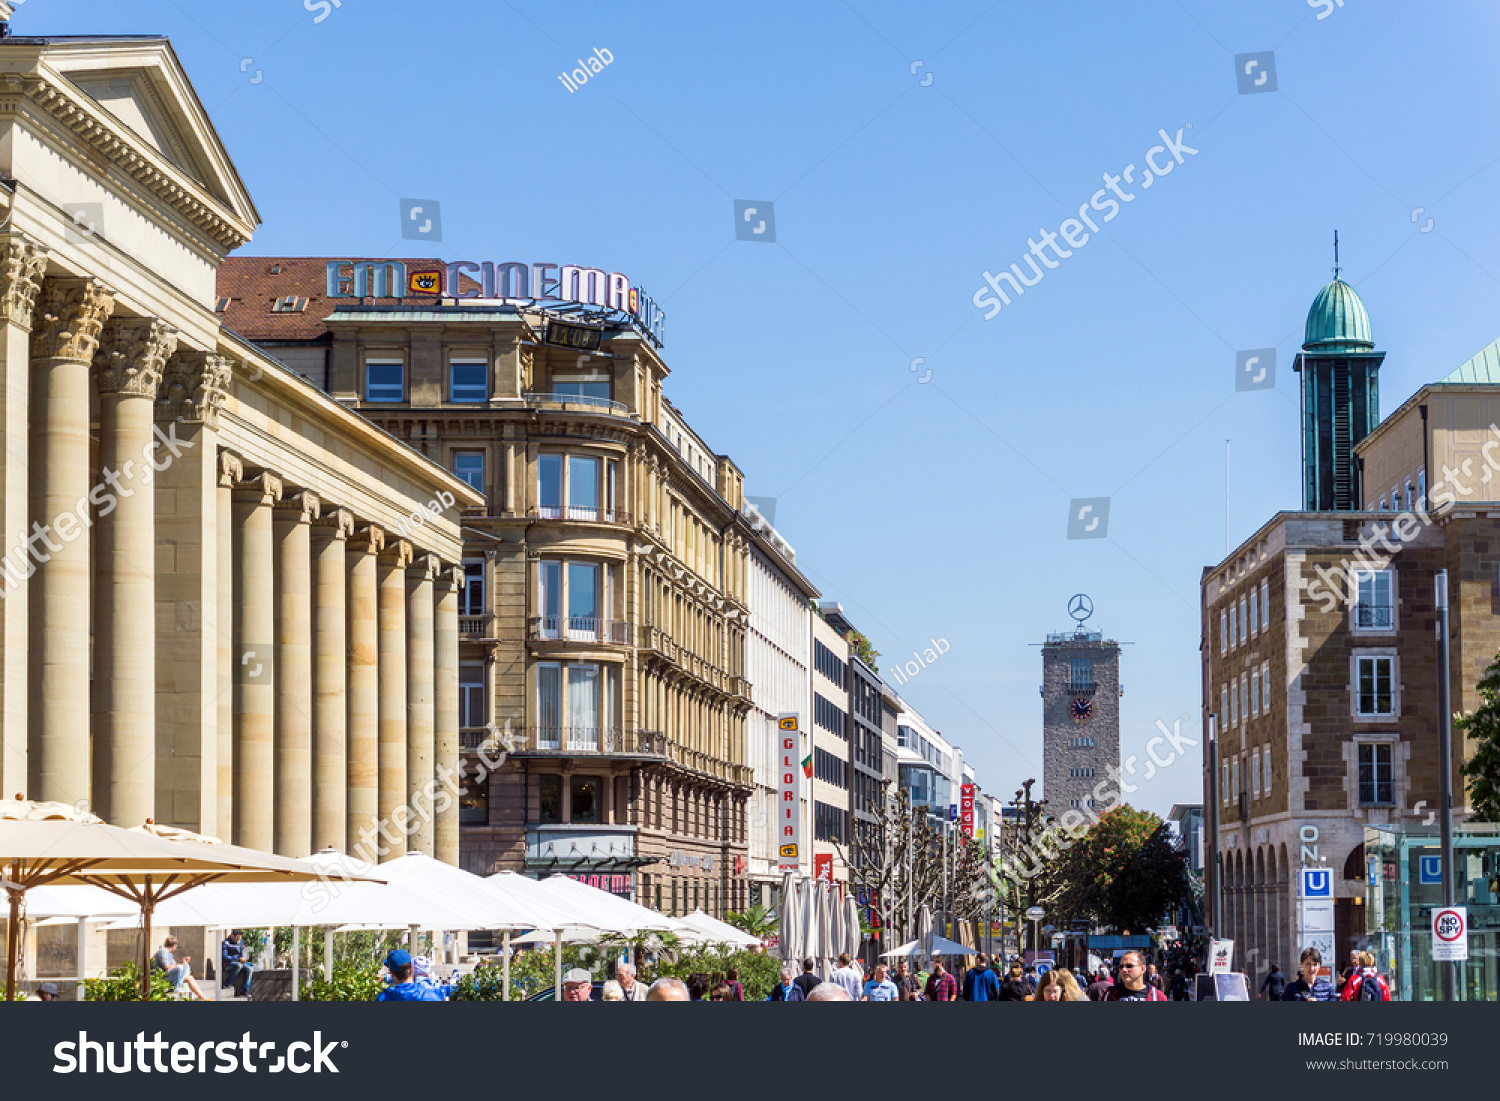 STUTTGART, GERMANY - April 12, 2017 : Tourists foot Street in Stuttgart, its metropolitan area are consistently ranked among the top 20 European metropolitan areas by GDP. #719980039